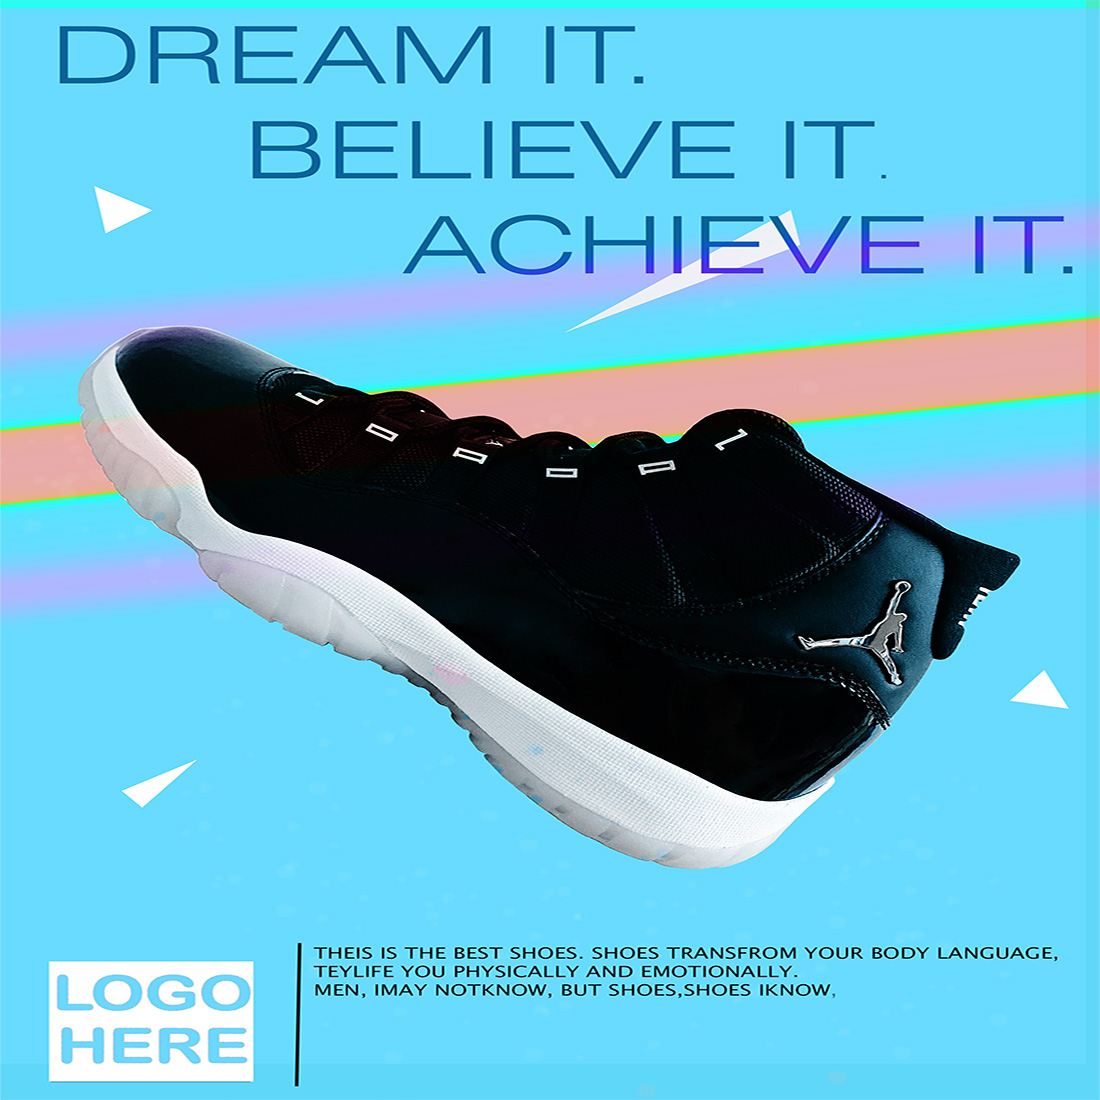 Fashion sports shoes social media post preview image.